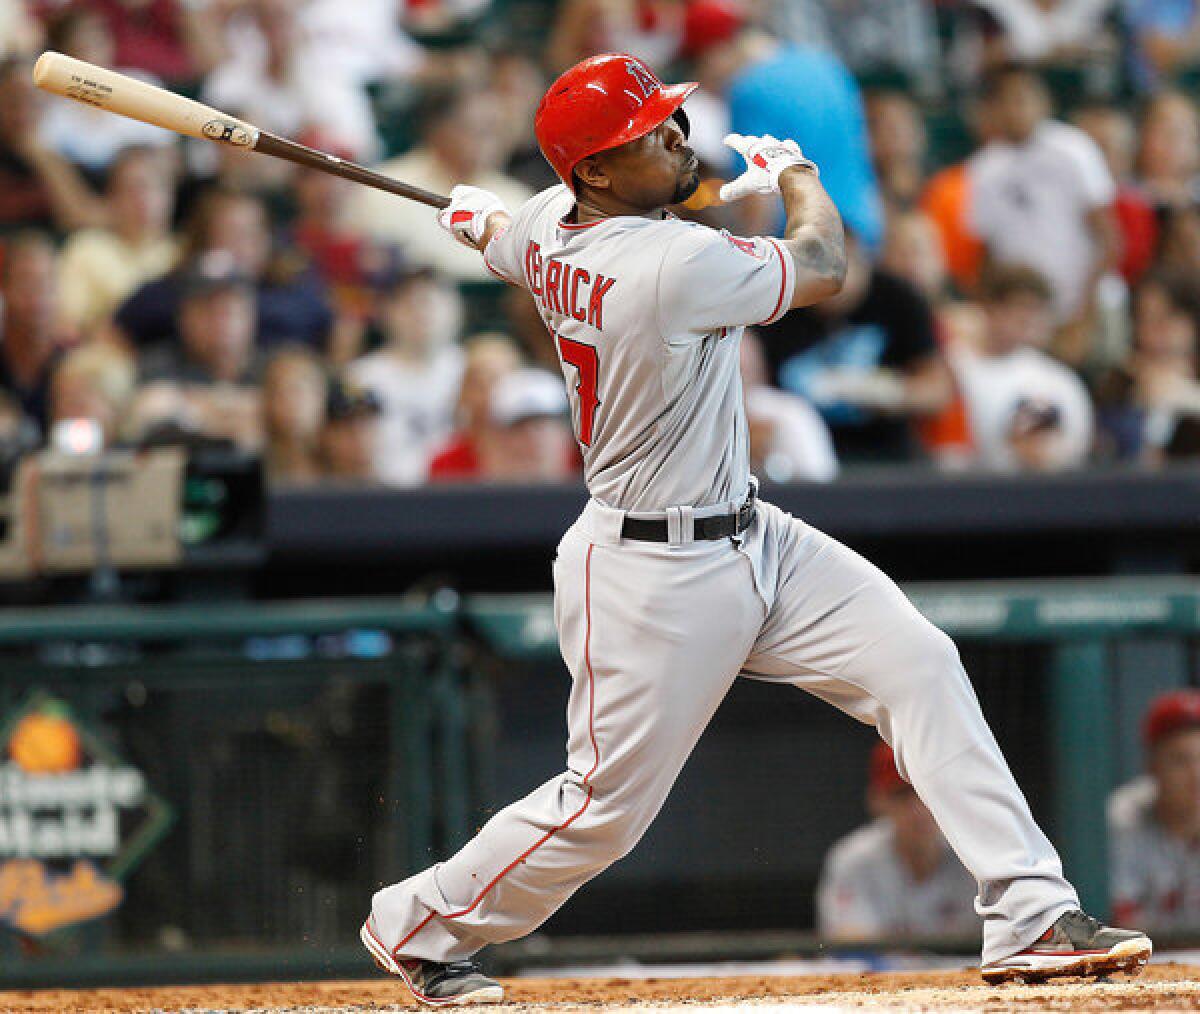 Angels second baseman Howie Kendrick follow through on a triple against the Astros in a game last week in Houston.